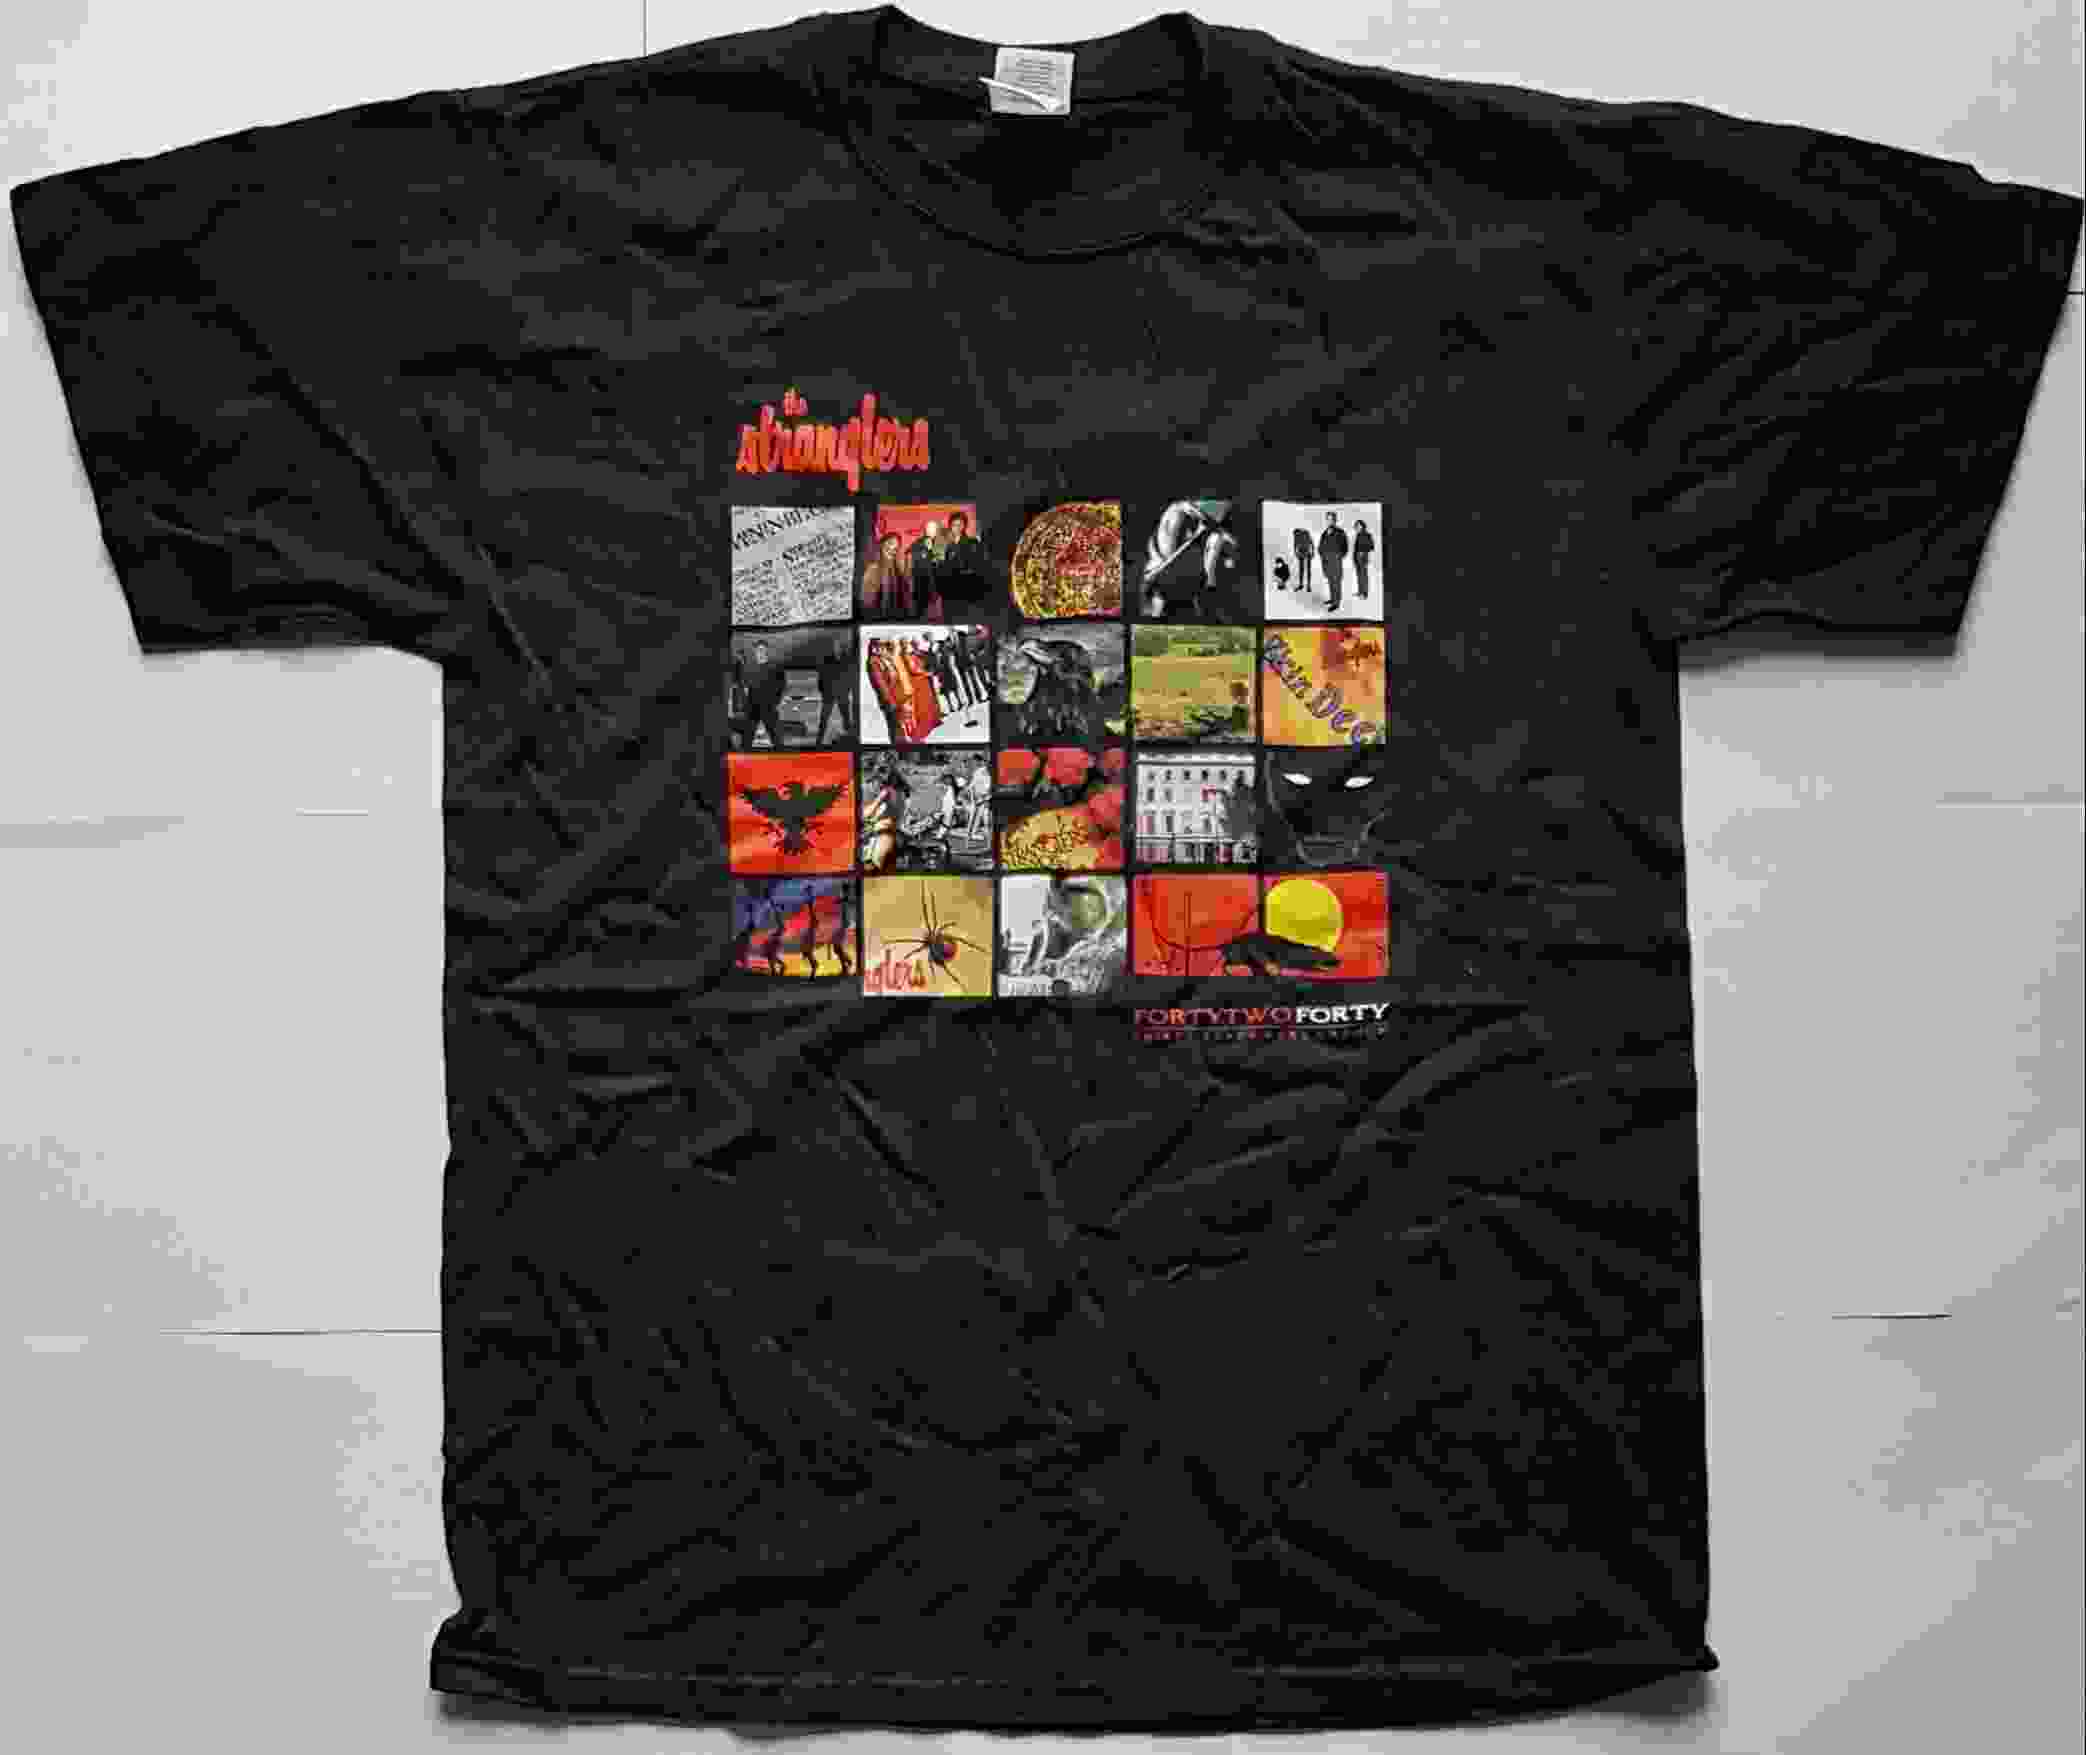 Picture of TS-TS-Singles Greatest hits tour by artist The Stranglers from The Stranglers clothes